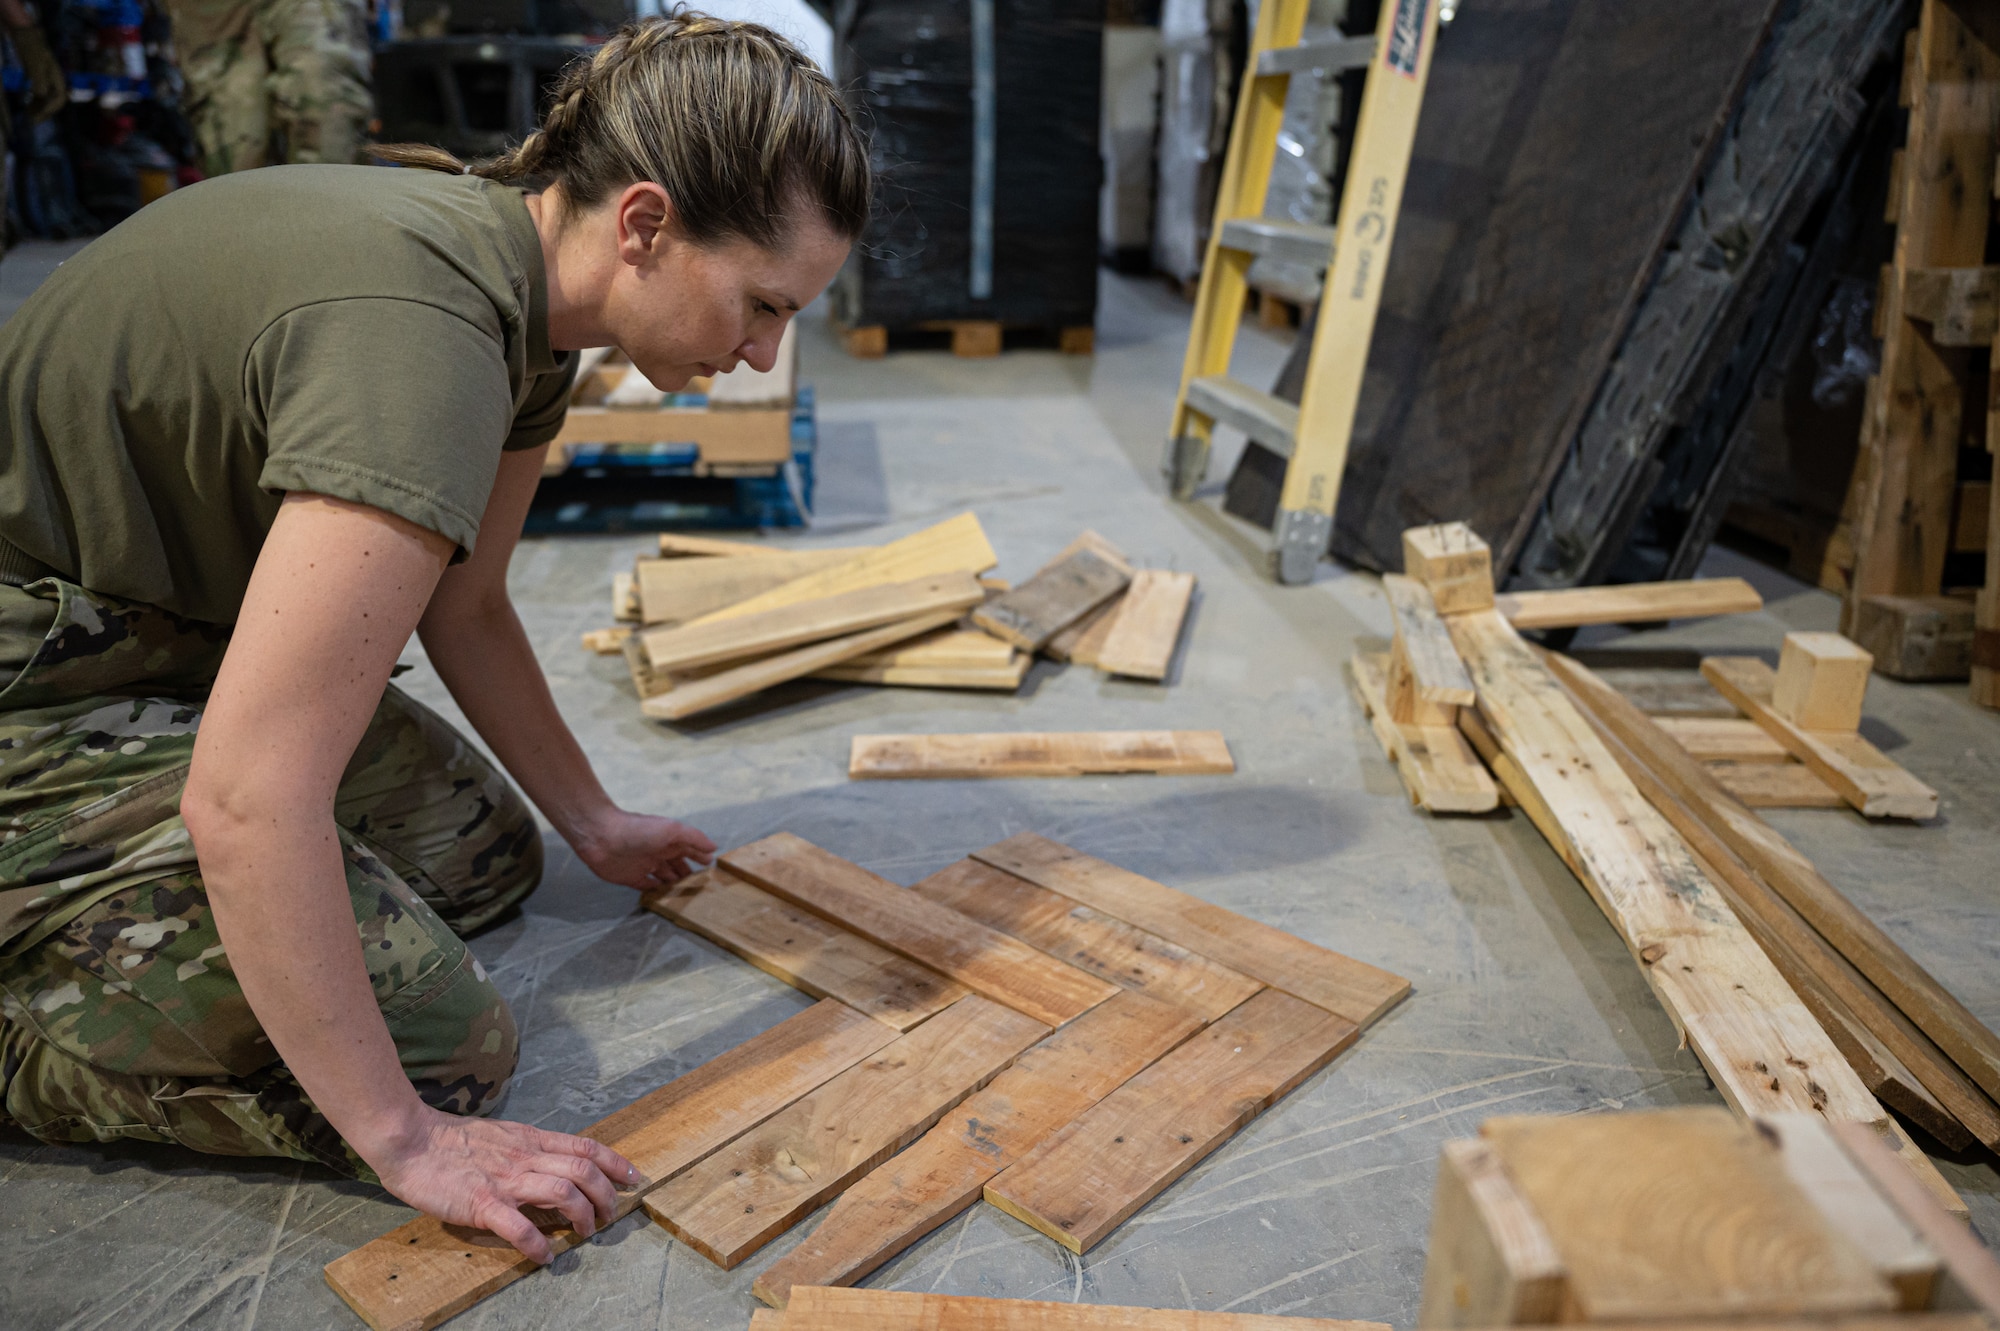 Project Salvage Pallets is a new upcycle program at Ali Al Salem Air Base that allows service members to use salvaged wooden pallets to create furniture for airmen dorms and common areas.